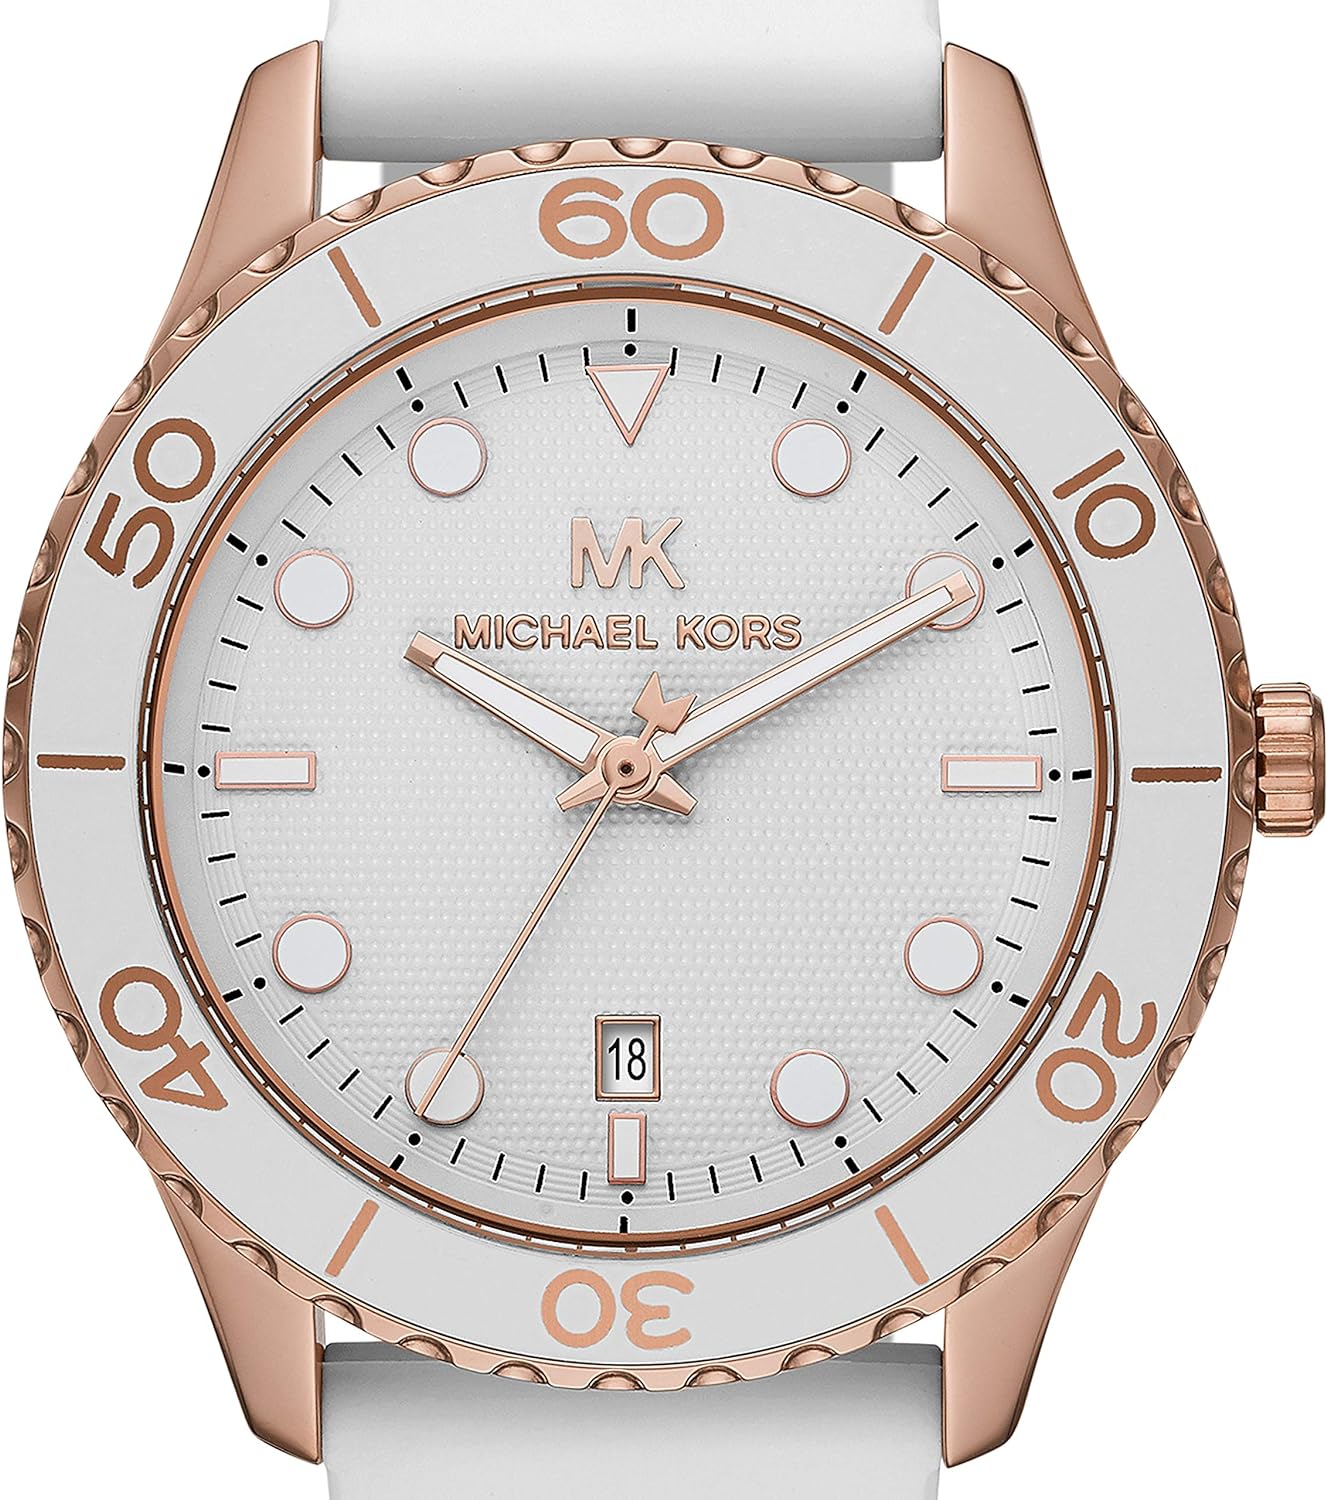 ĐỒNG HỒ ĐEO TAY MICHAEL KORS RUNWAY DIVE OVERSIZED ROSE GOLD-TONE SILICONE STRAP WATCH MK6853 4